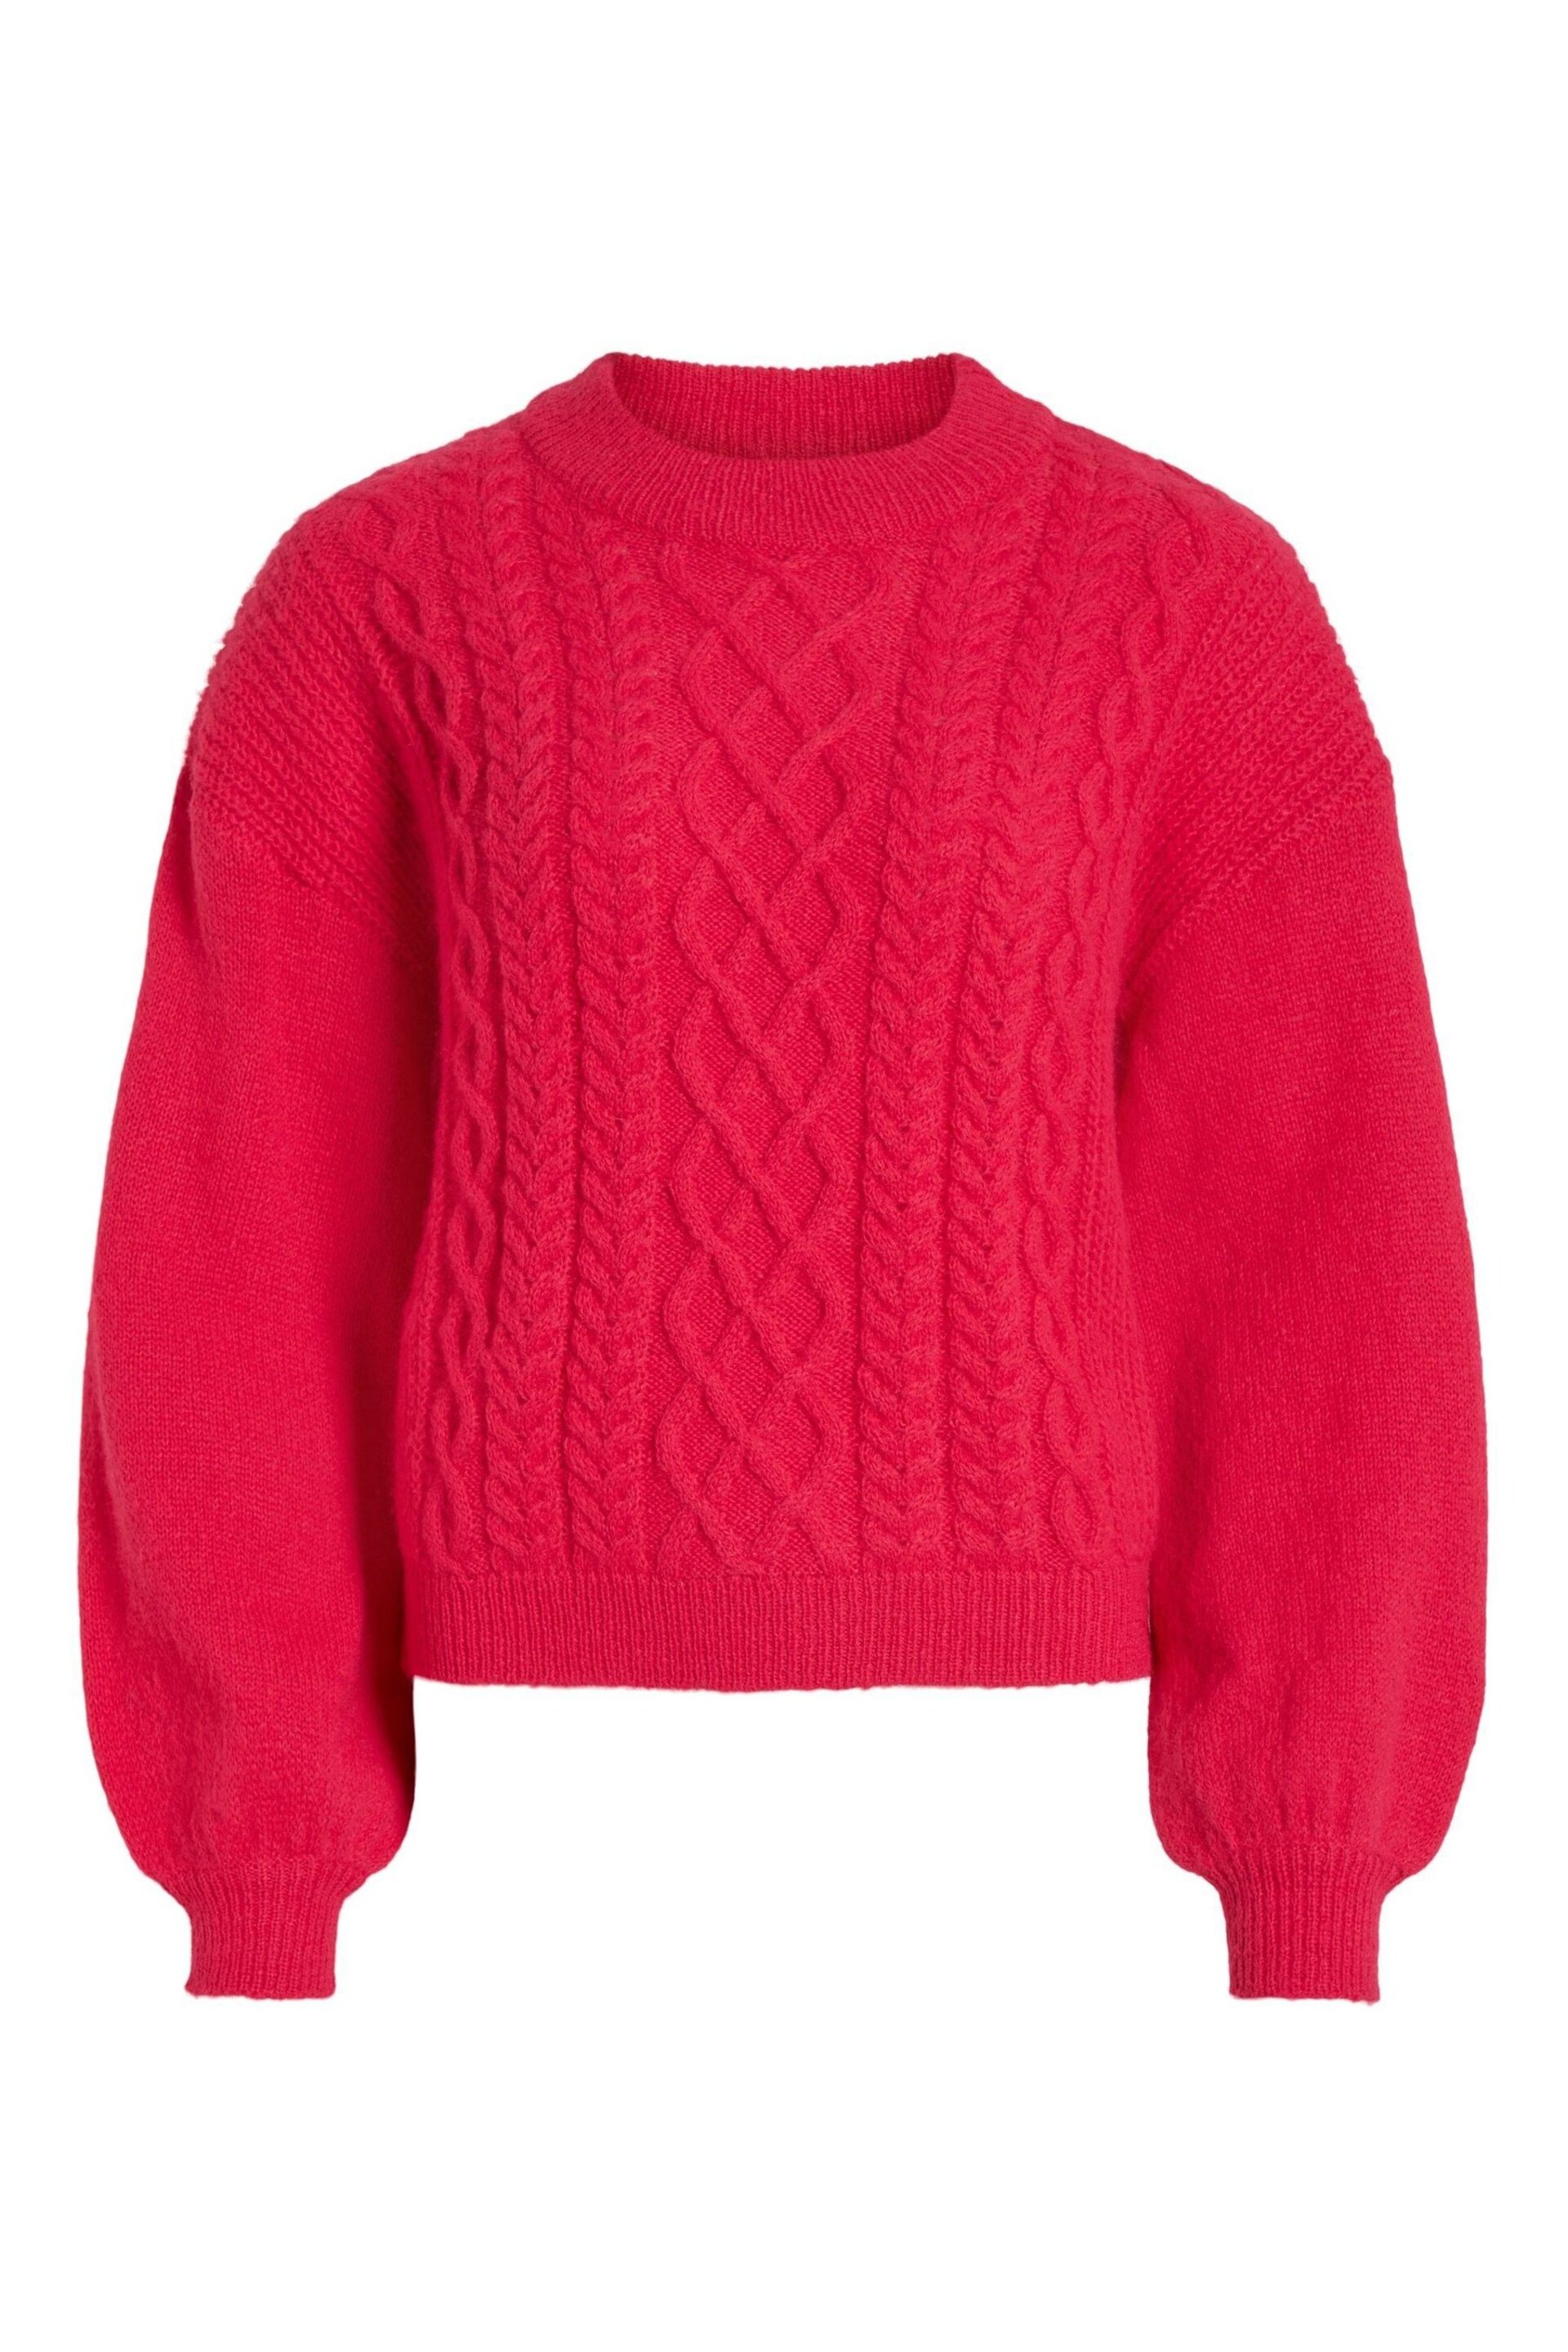 VILA Pink Round Neck Cosy Cable Knit Jumper - Image 5 of 5